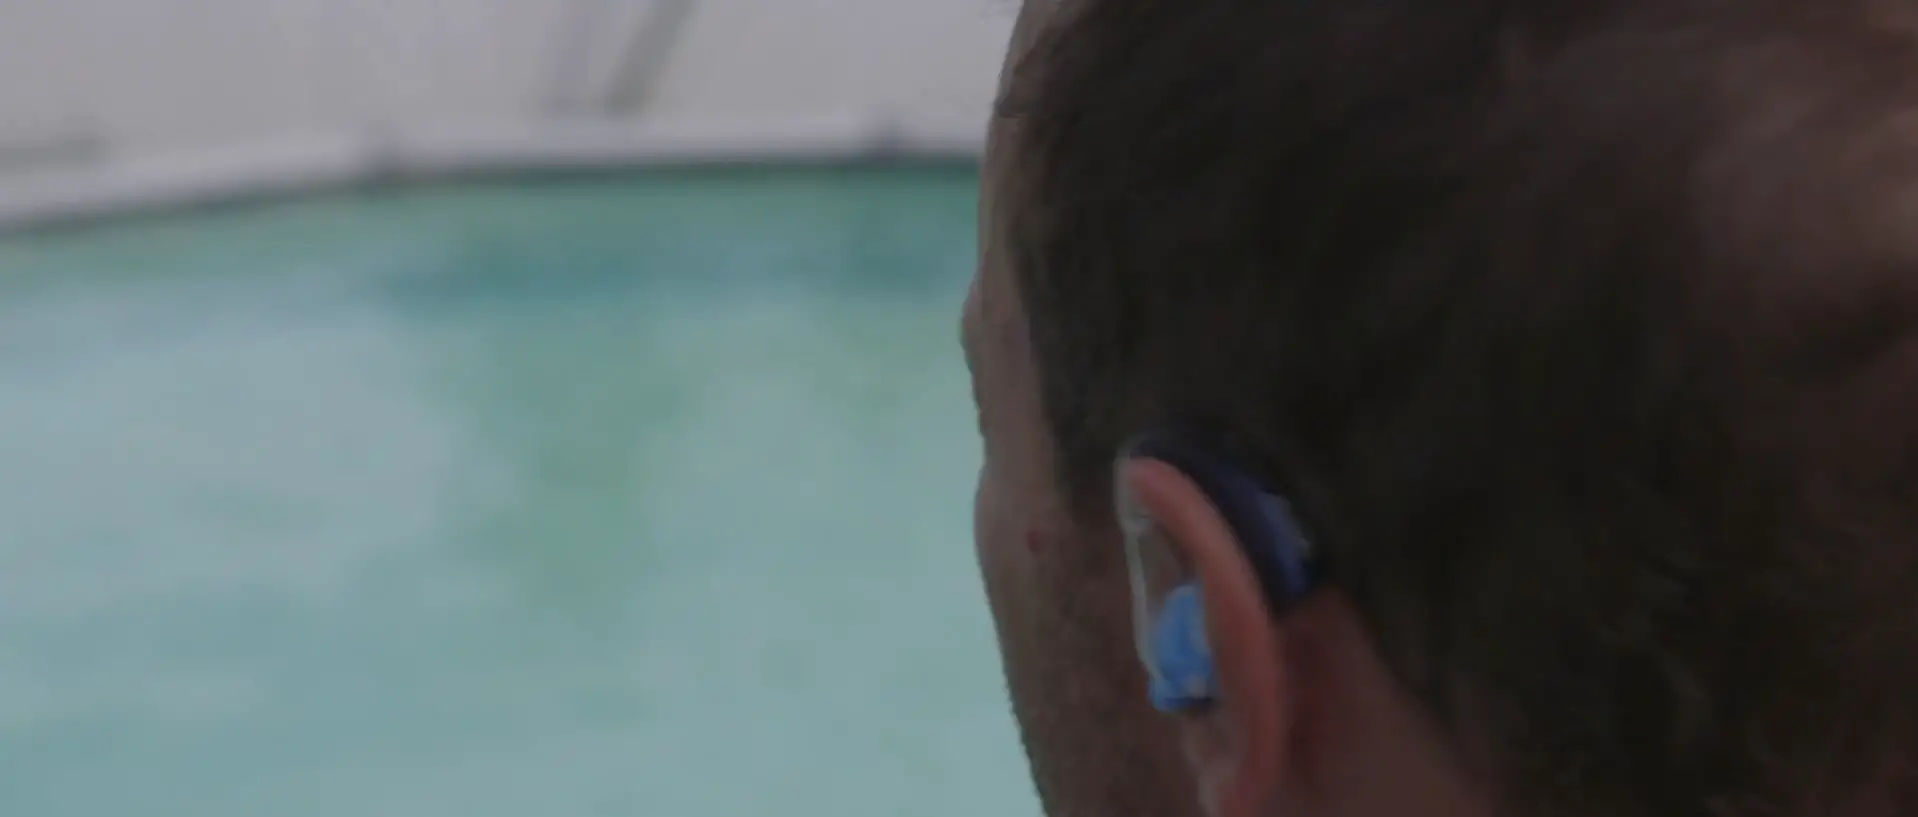 How Do I Keep My Hearing Aids Safe When I'm Around Water?